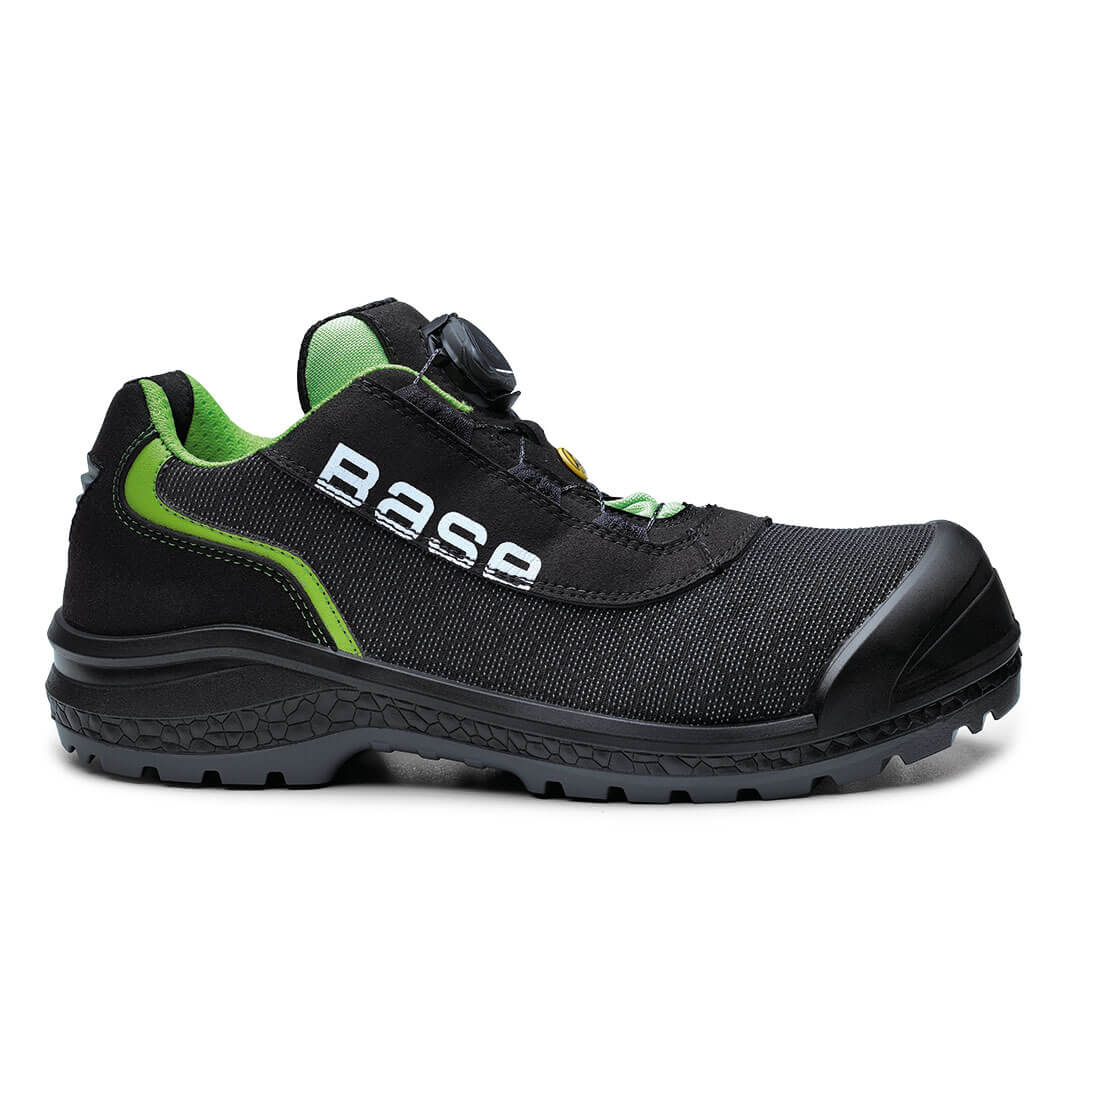 Base Be-Ready Toe Cap Work Safety Shoes Black/Green 1#colour_black-green